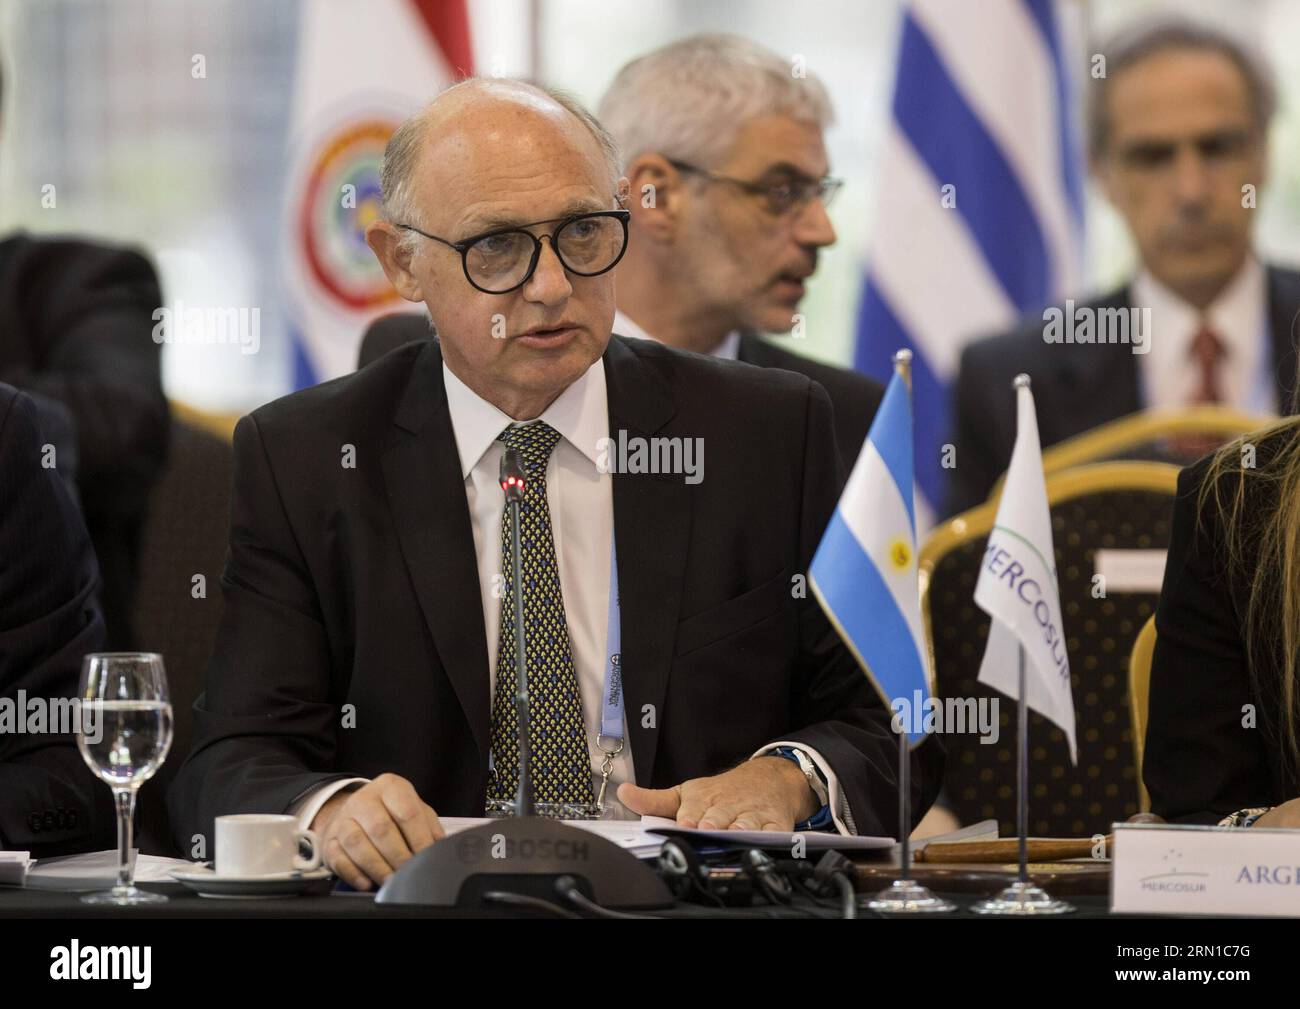 (141216) -- PARANA, Dec. 16, 2014 -- Argentina s Foreign Minister Hector Timerman (front) takes part in the regular meeting of the Common Market Council in the framework of the 47th Southern Common Market (MERCOSUR) trade bloc presidential summit, in Parana city, north of Buenos Aires, Argentina, on Dec. 16, 2014. The 47th Southern Common Market (MERCOSUR) trade bloc presidential summit will open on Wednesday in Parana. Martin Zabala) ARGENTINA-PARANA-MERCOSUR-SUMMIT e MARTINxZABALA PUBLICATIONxNOTxINxCHN   Parana DEC 16 2014 Argentina S Foreign Ministers Hector  Front Takes Part in The Regula Stock Photo